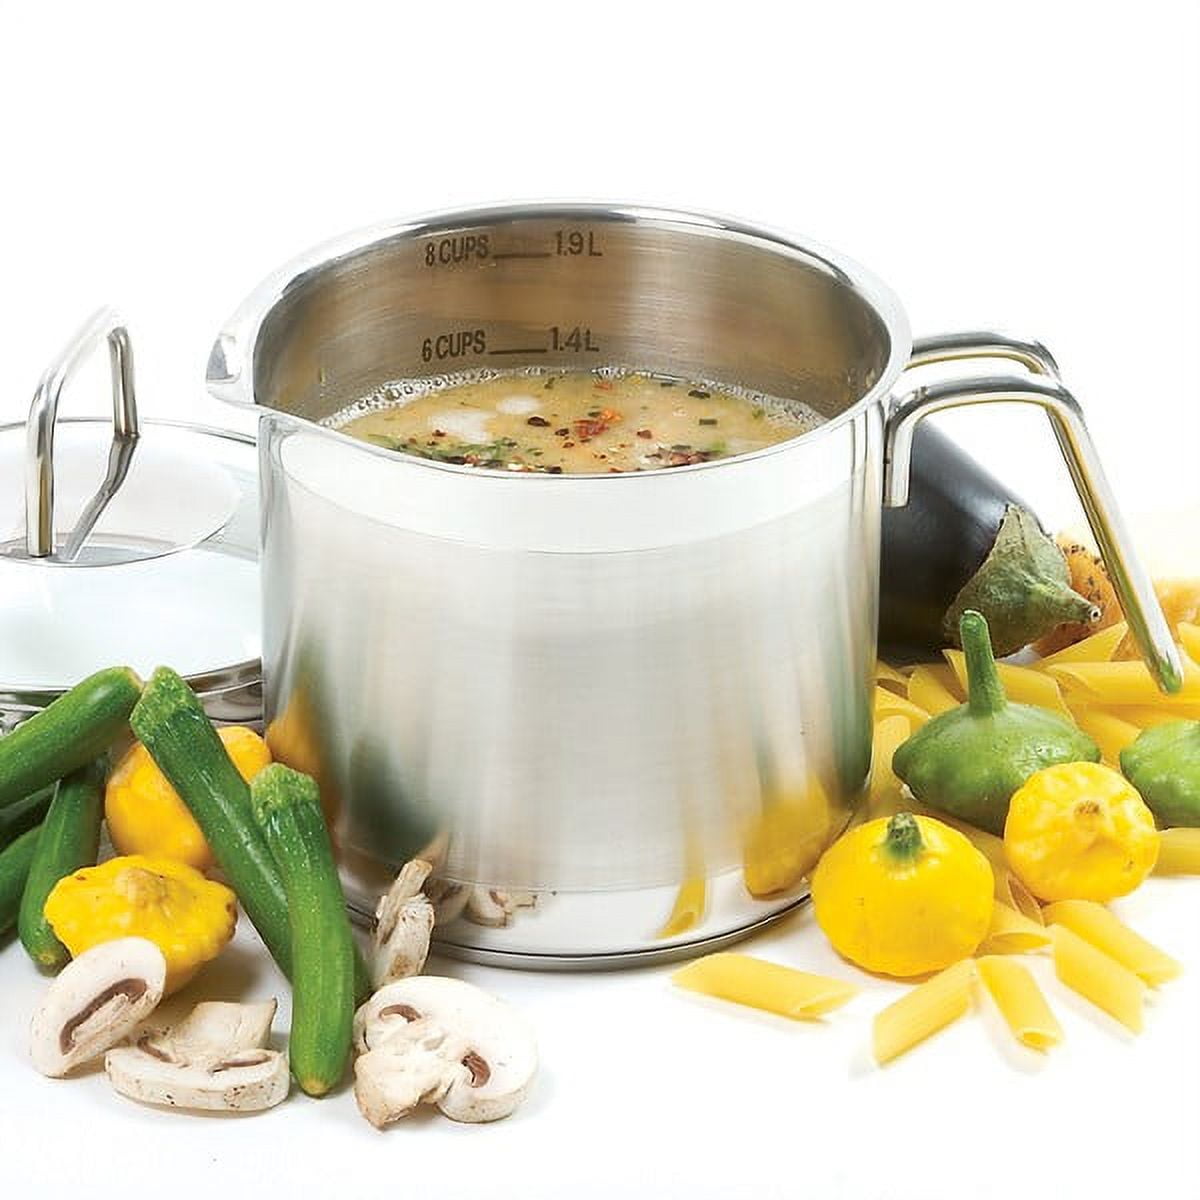 Food Network™ 8-qt. Stainless Steel Multipot Set